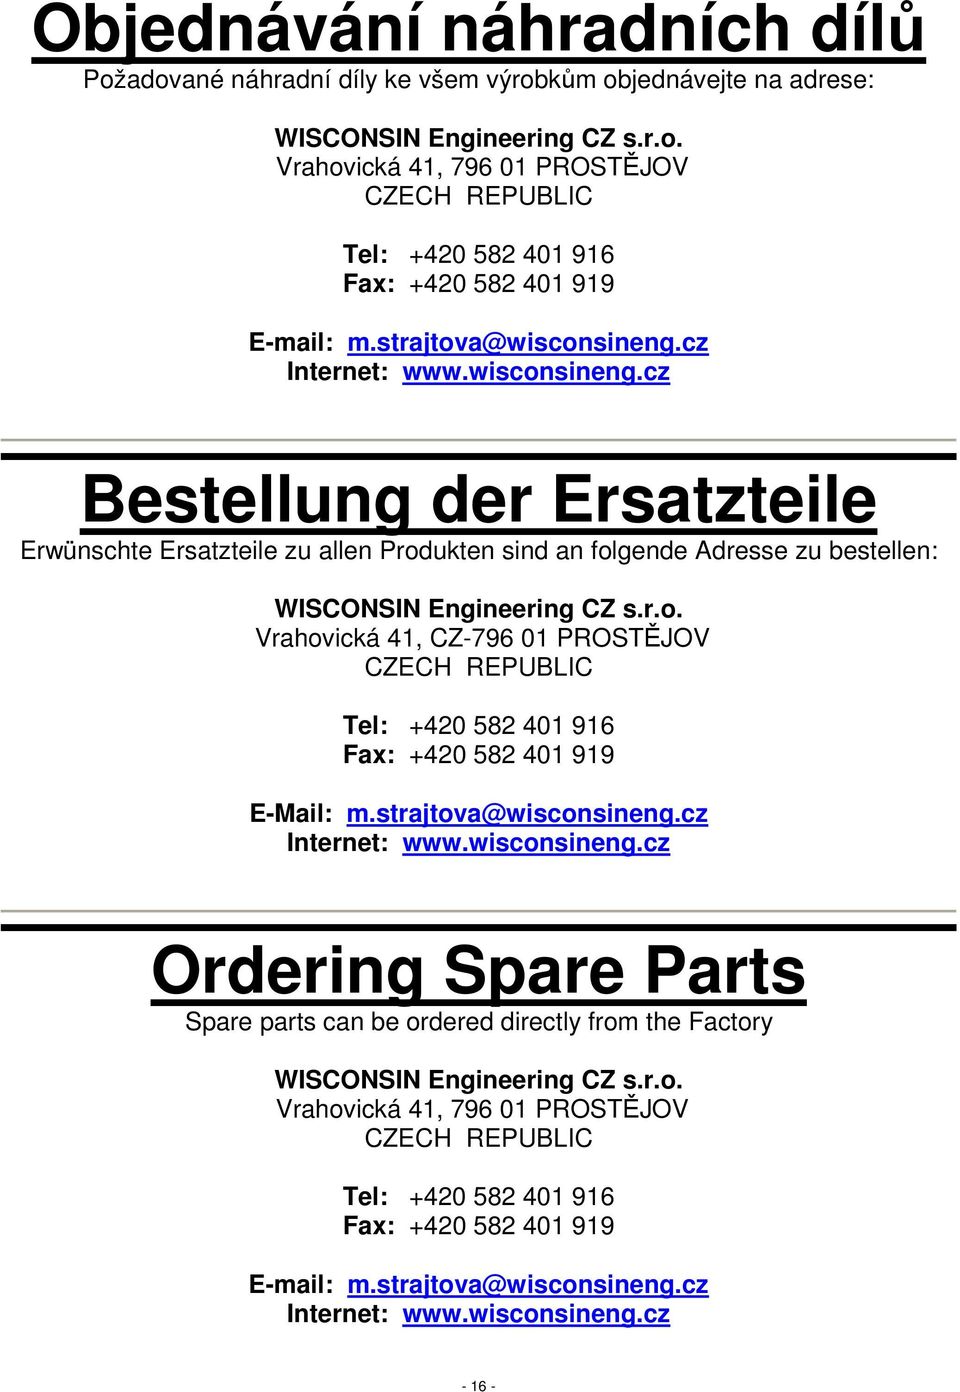 strajtova@wisconsineng.cz Internet: www.wisconsineng.cz Ordering Spare Parts Spare parts can be ordered directly from the Factory WISCONSIN Engineering CZ s.r.o. Vrahovická 41, 796 01 PROSTĚJOV CZECH REPUBLIC Tel: +420 582 401 916 Fax: +420 582 401 919 E-mail: m.